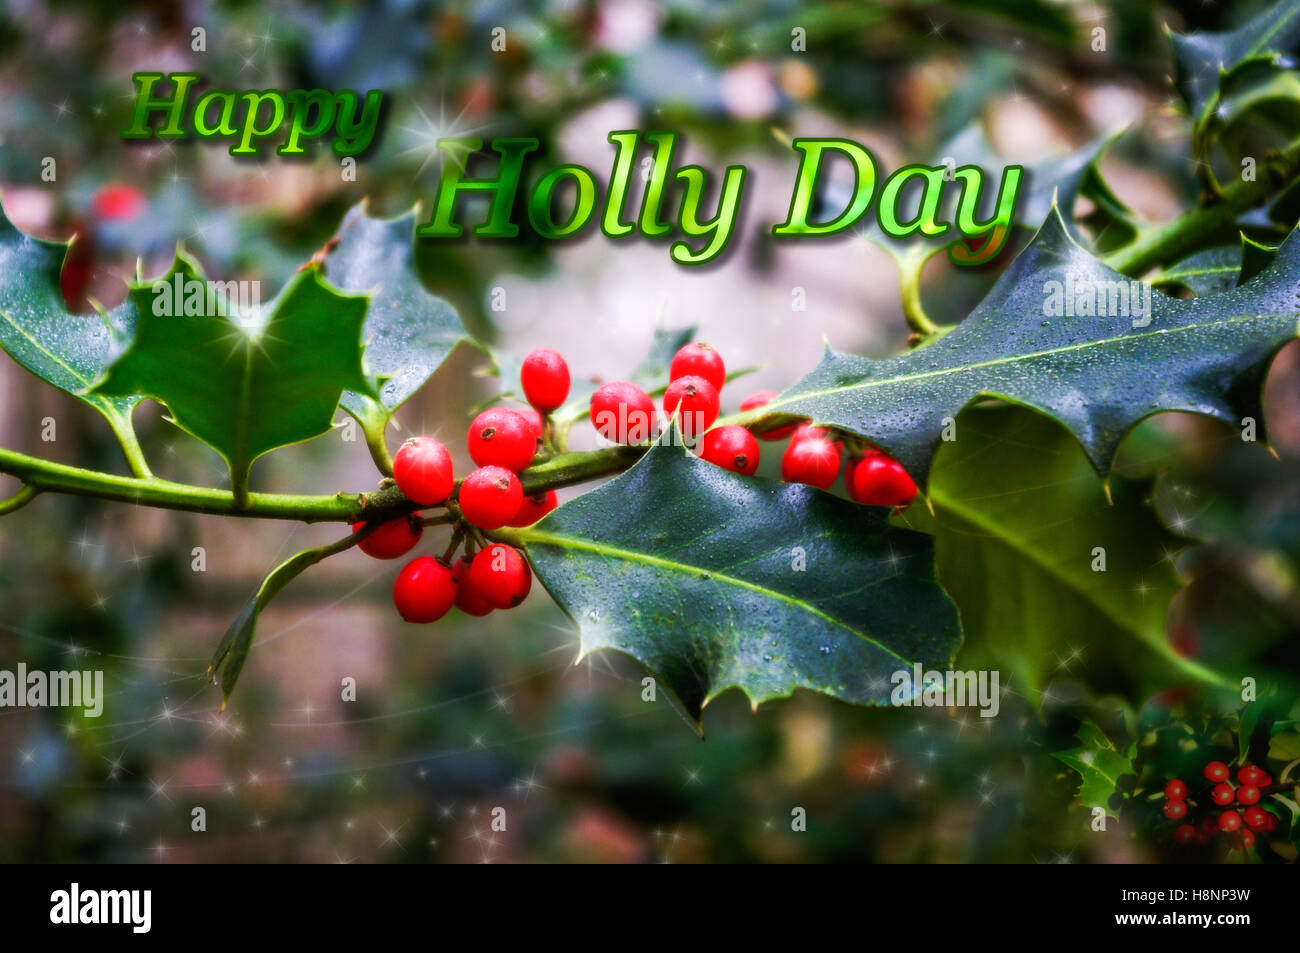 Christmas greetings card design with holly and berries and wording HAPPY HOLLY DAY. Stock Photo